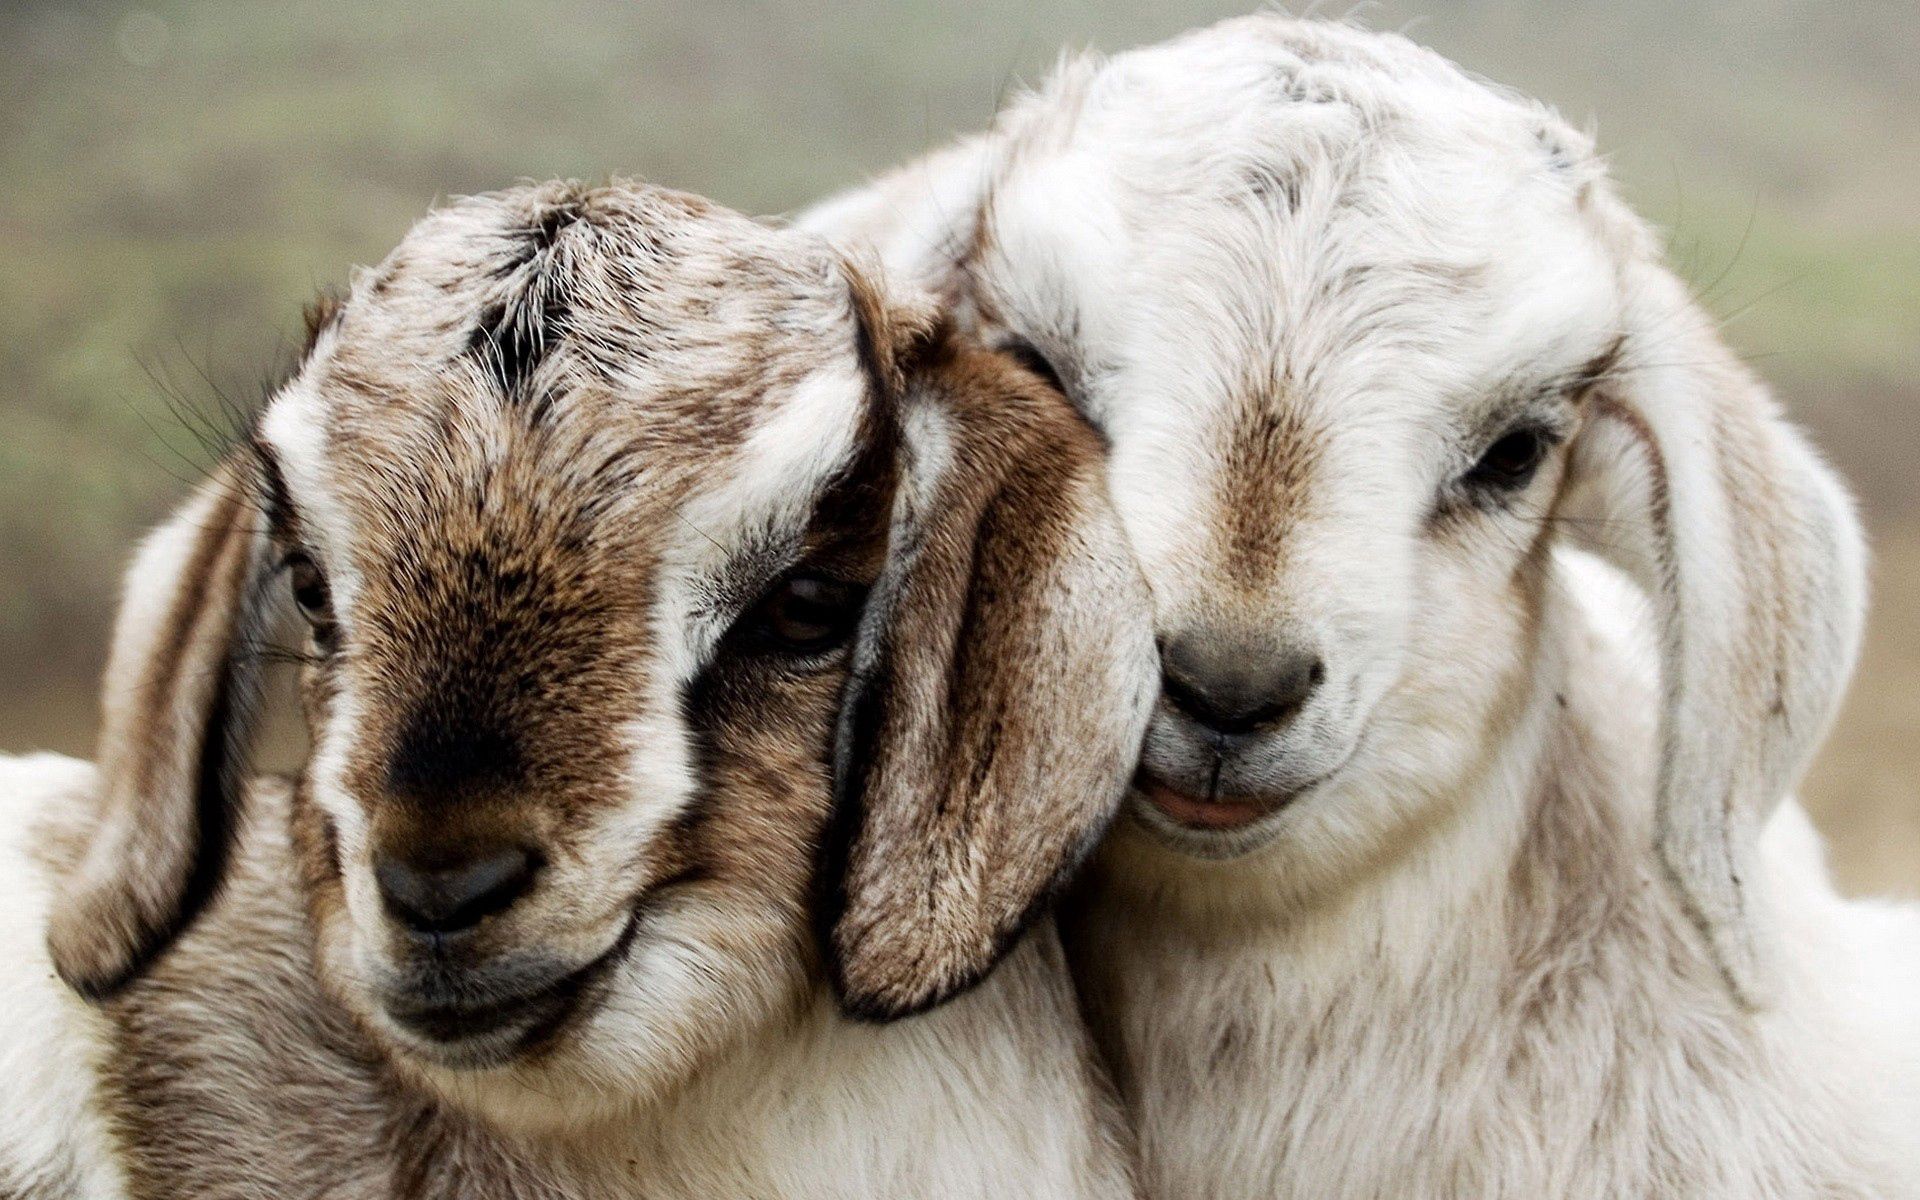 79661 download wallpaper animals, couple, pair, beautiful, sheep, lambs screensavers and pictures for free